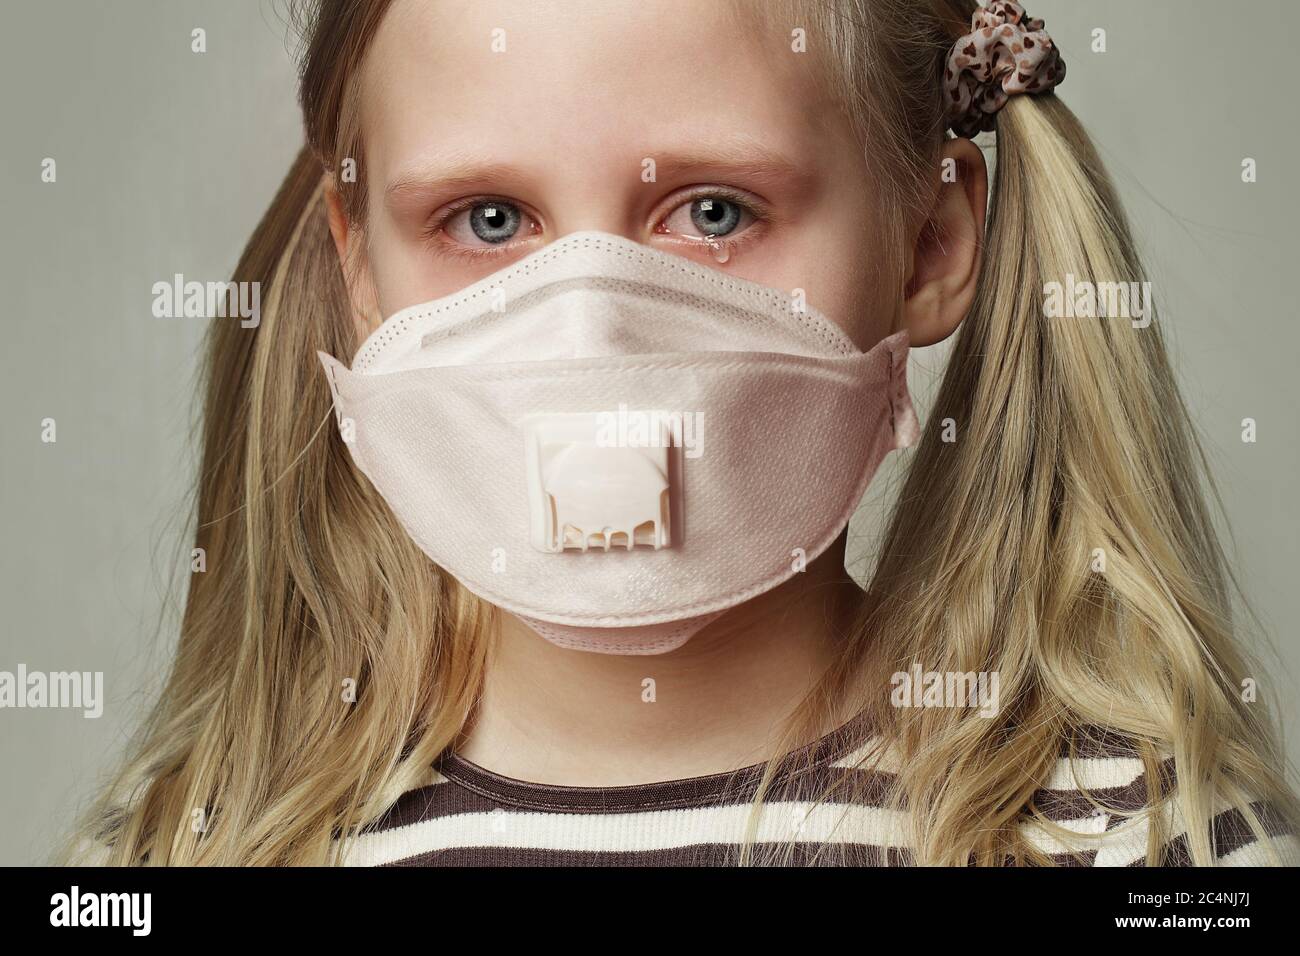 Child girl in protective medical mask crying, closeup portrait Stock Photo